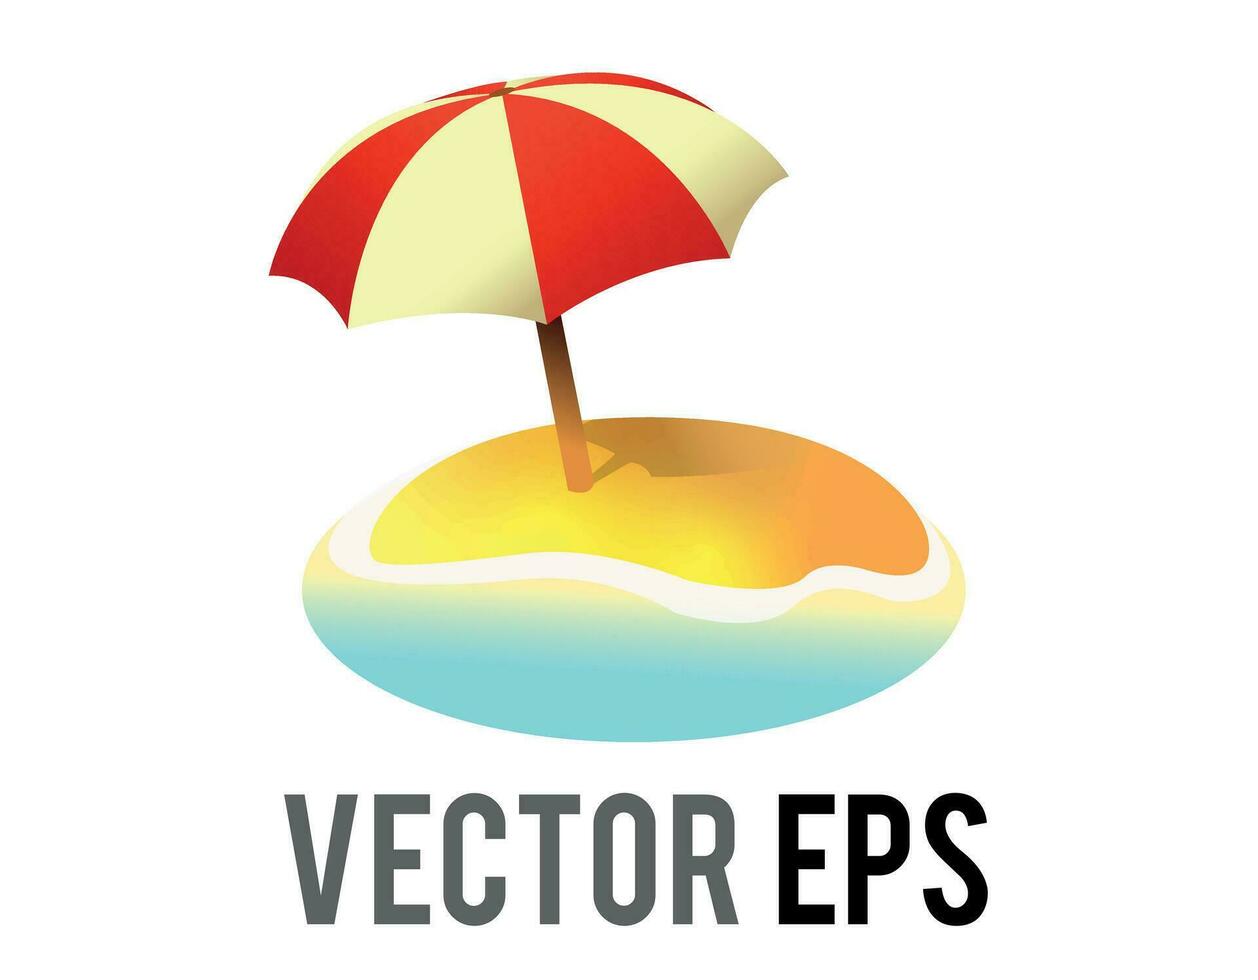 Vector beach island icon, with sun umbrella its shadow, sand and ocean water